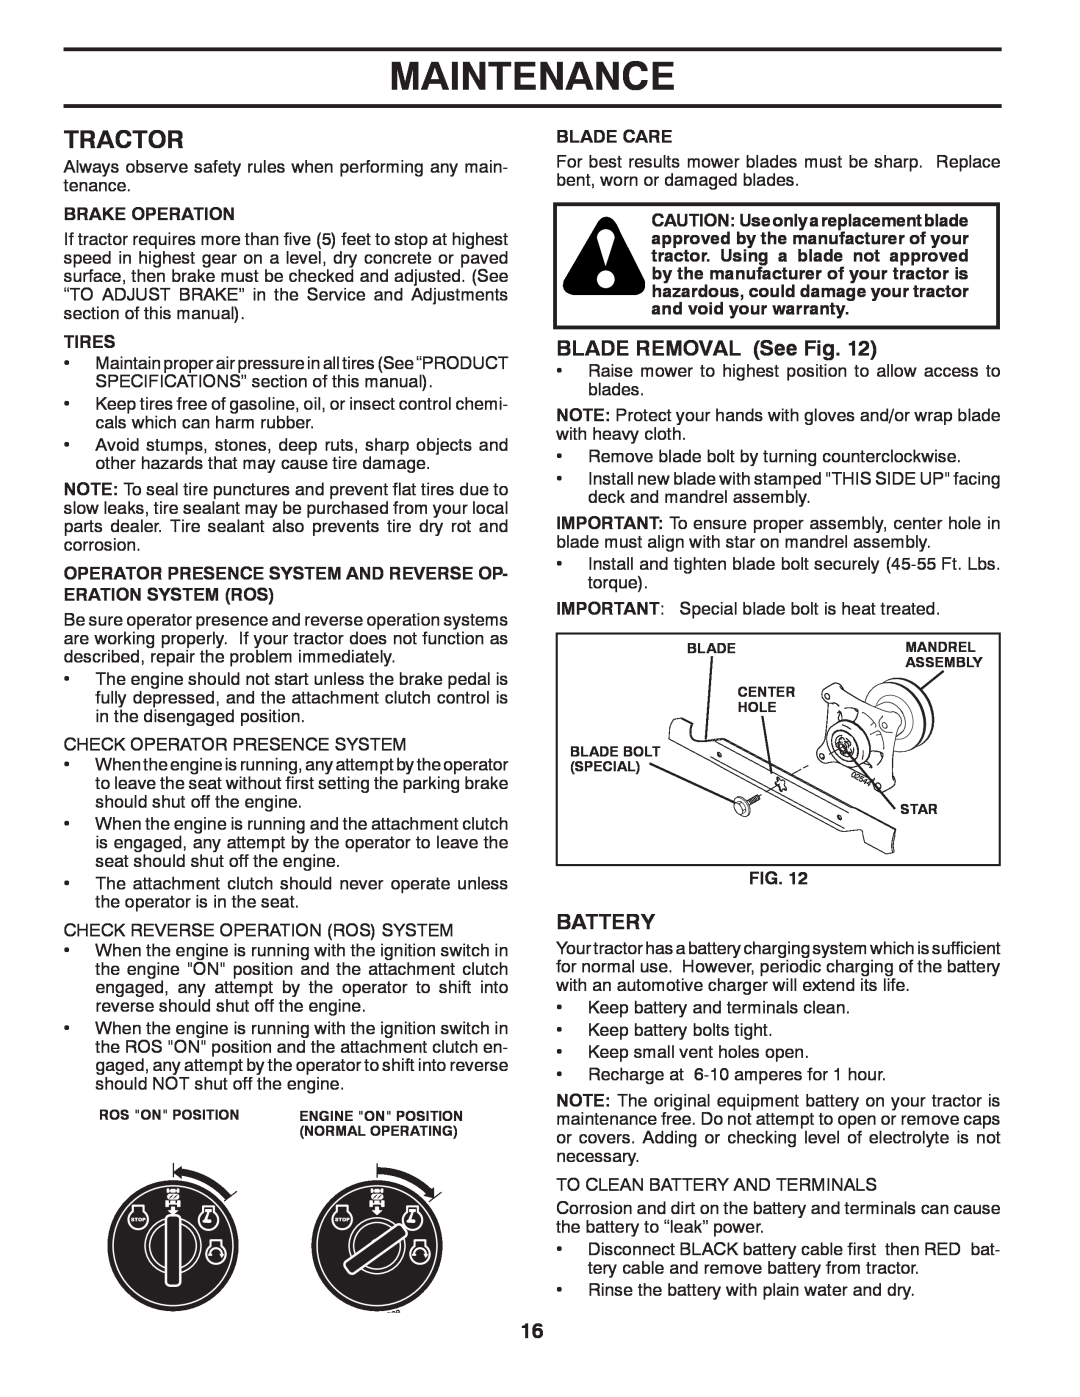 Husqvarna 96043002402, YT16542 owner manual Tractor, BLADE REMOVAL See Fig, Battery, Maintenance 